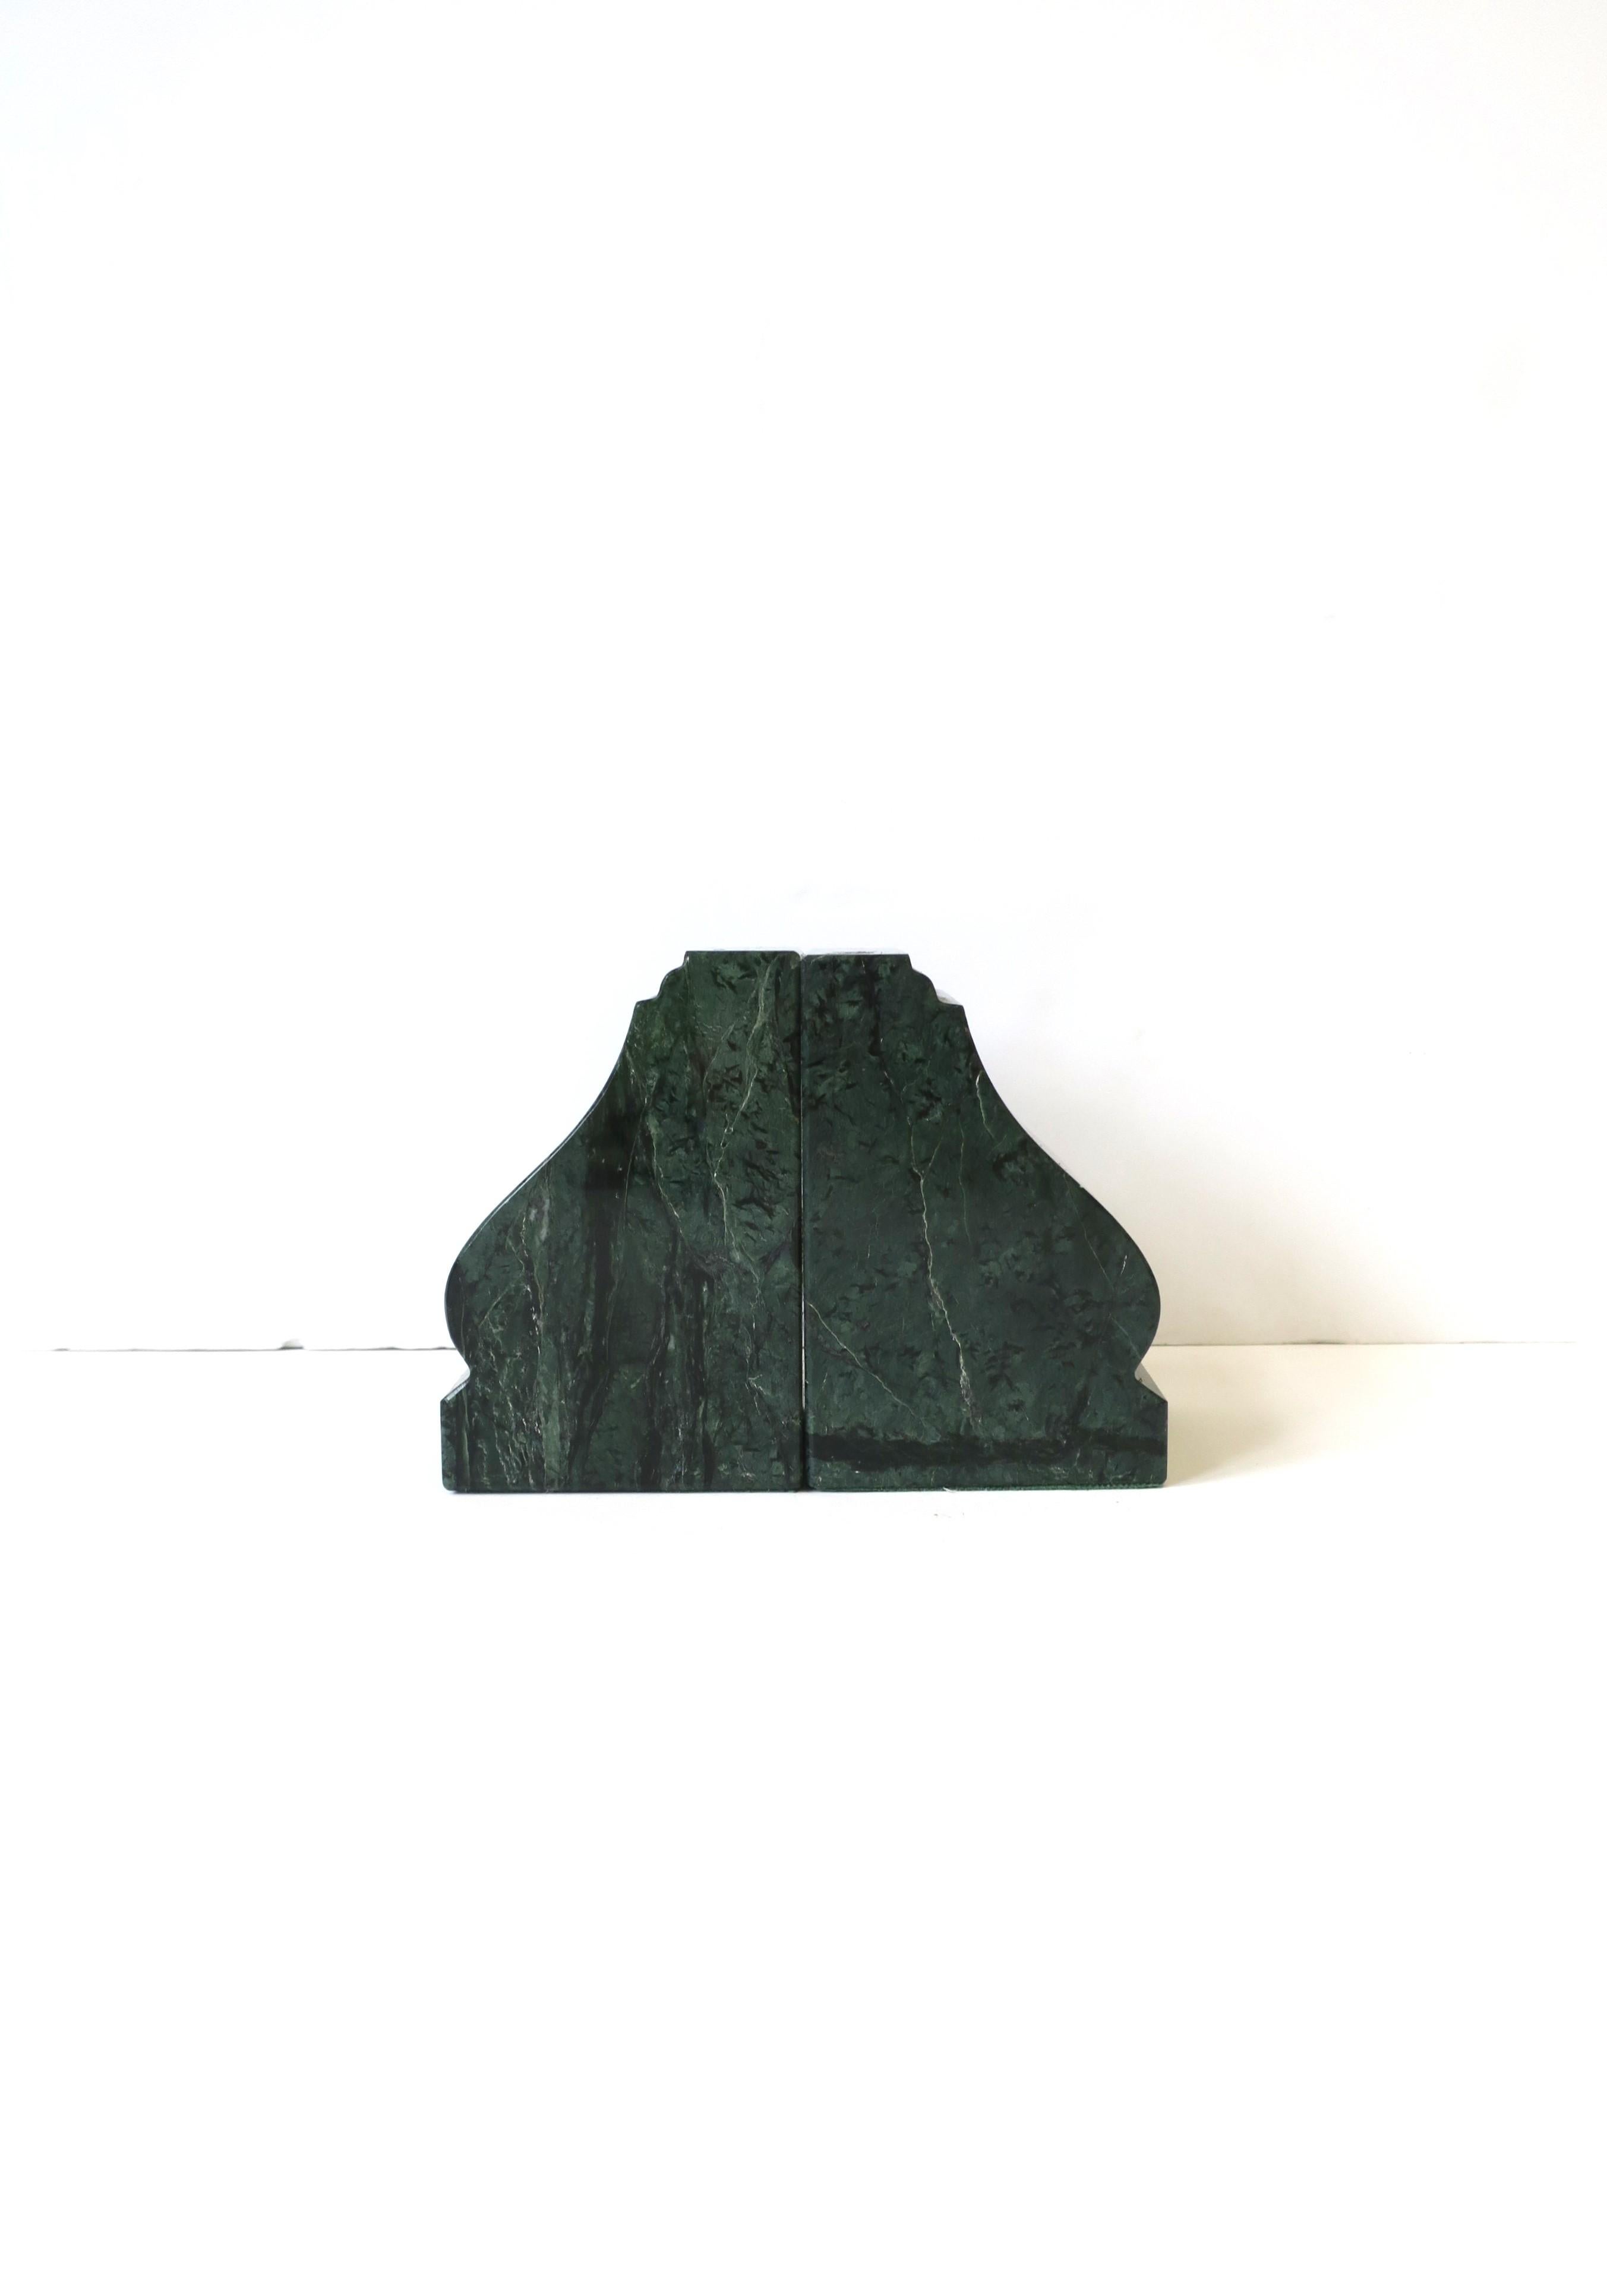 Late 20th Century Italian Verde Dark Green Marble Bookends, Pair For Sale